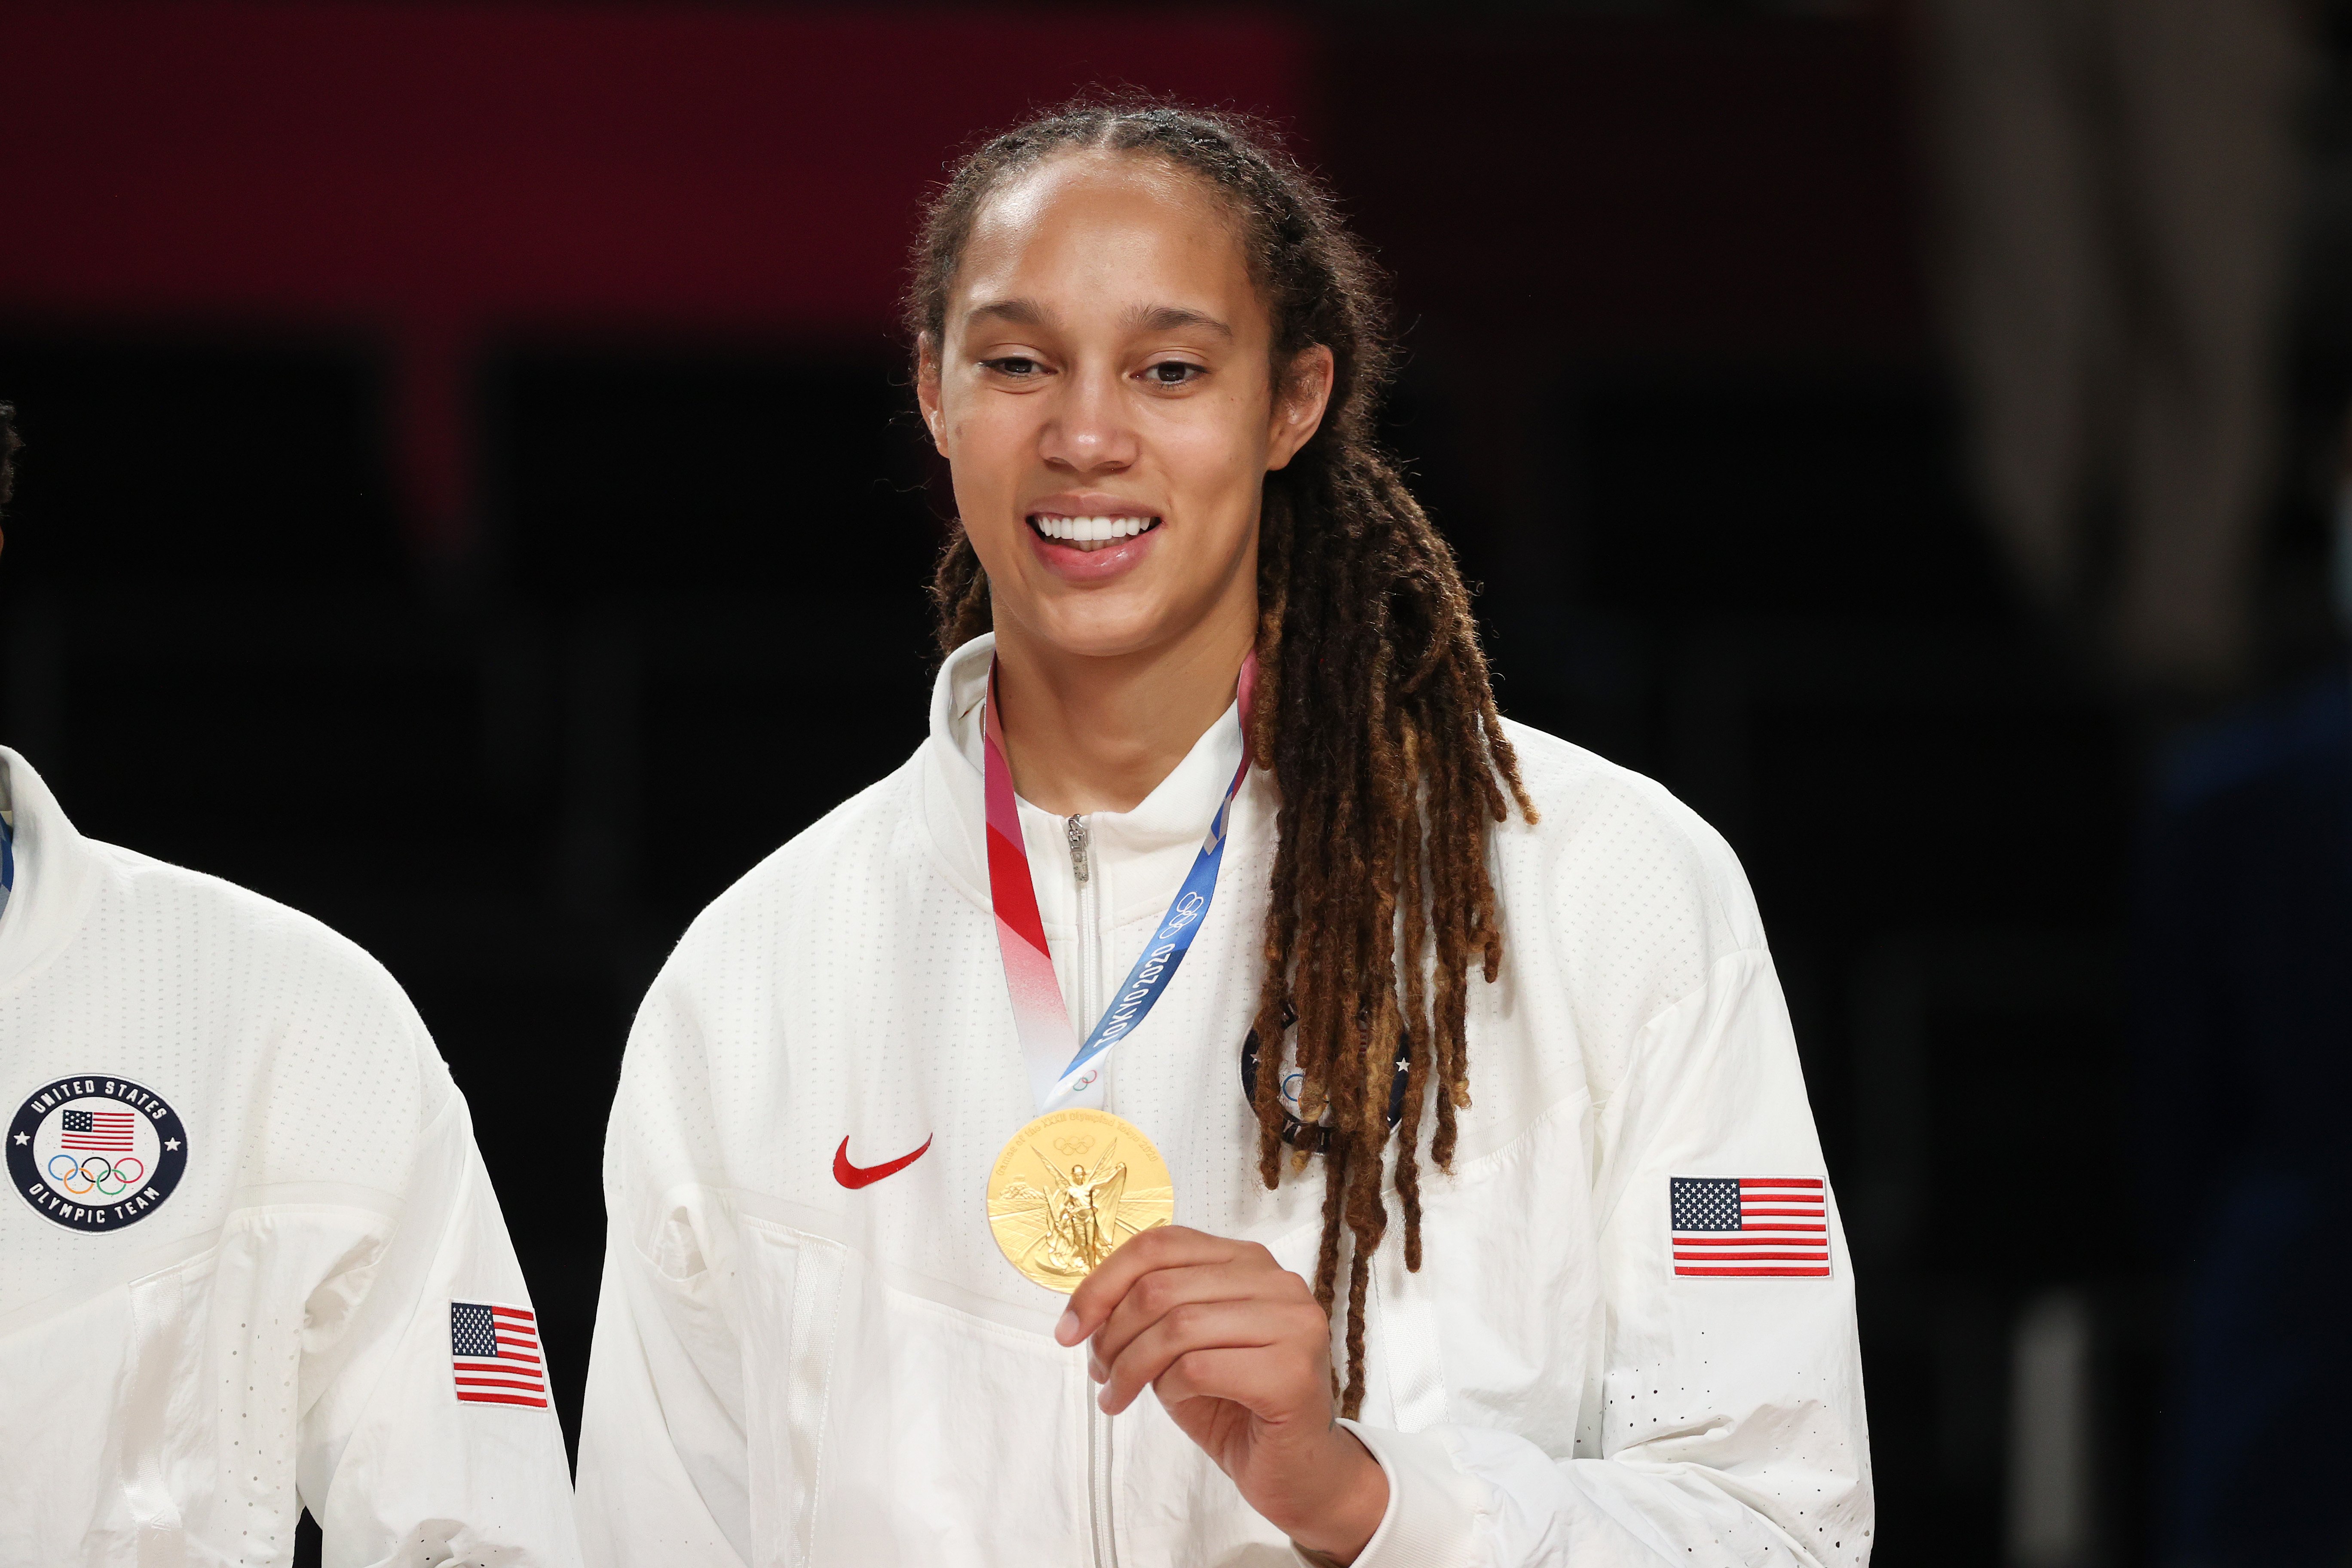 Brittney Griner after the 2020 Tokyo Olympic games on August 8, 2021, in Japan | Source: Getty Images